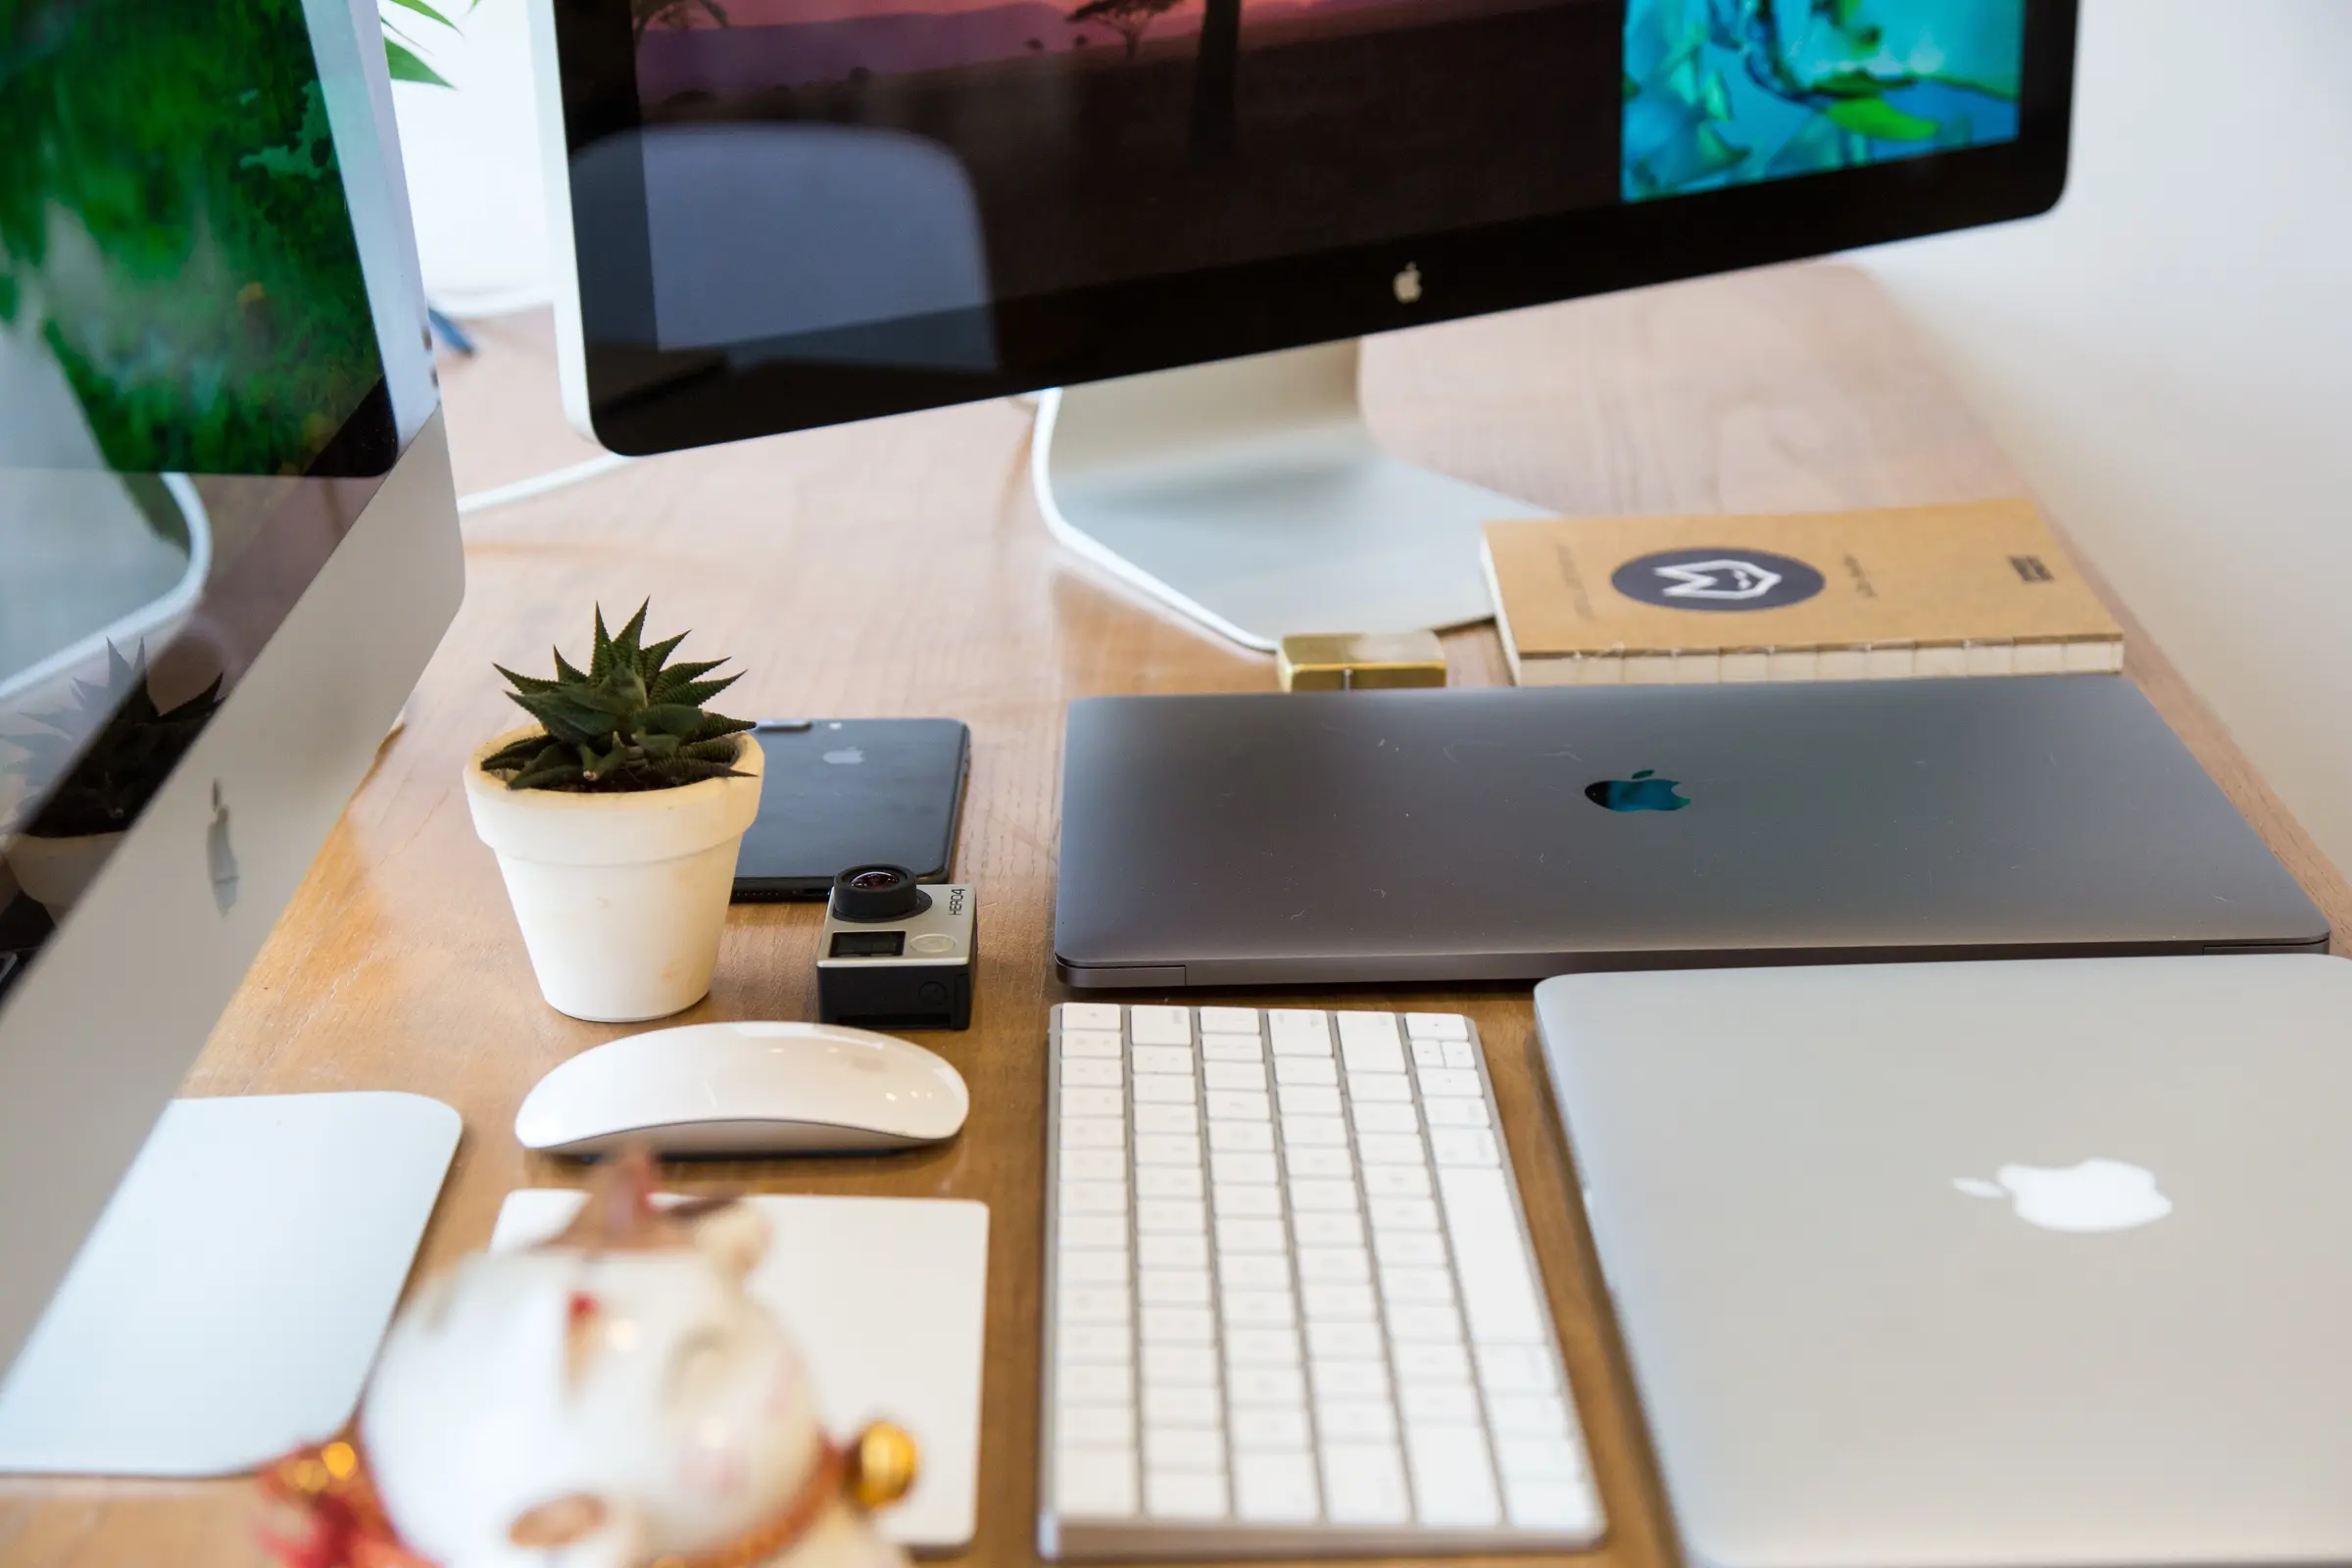 image of a desk with a computer, a wireless keyboard and mouse, 2 computers and some ornaments representing the graphic designer content creator job position featured image for gas leaks